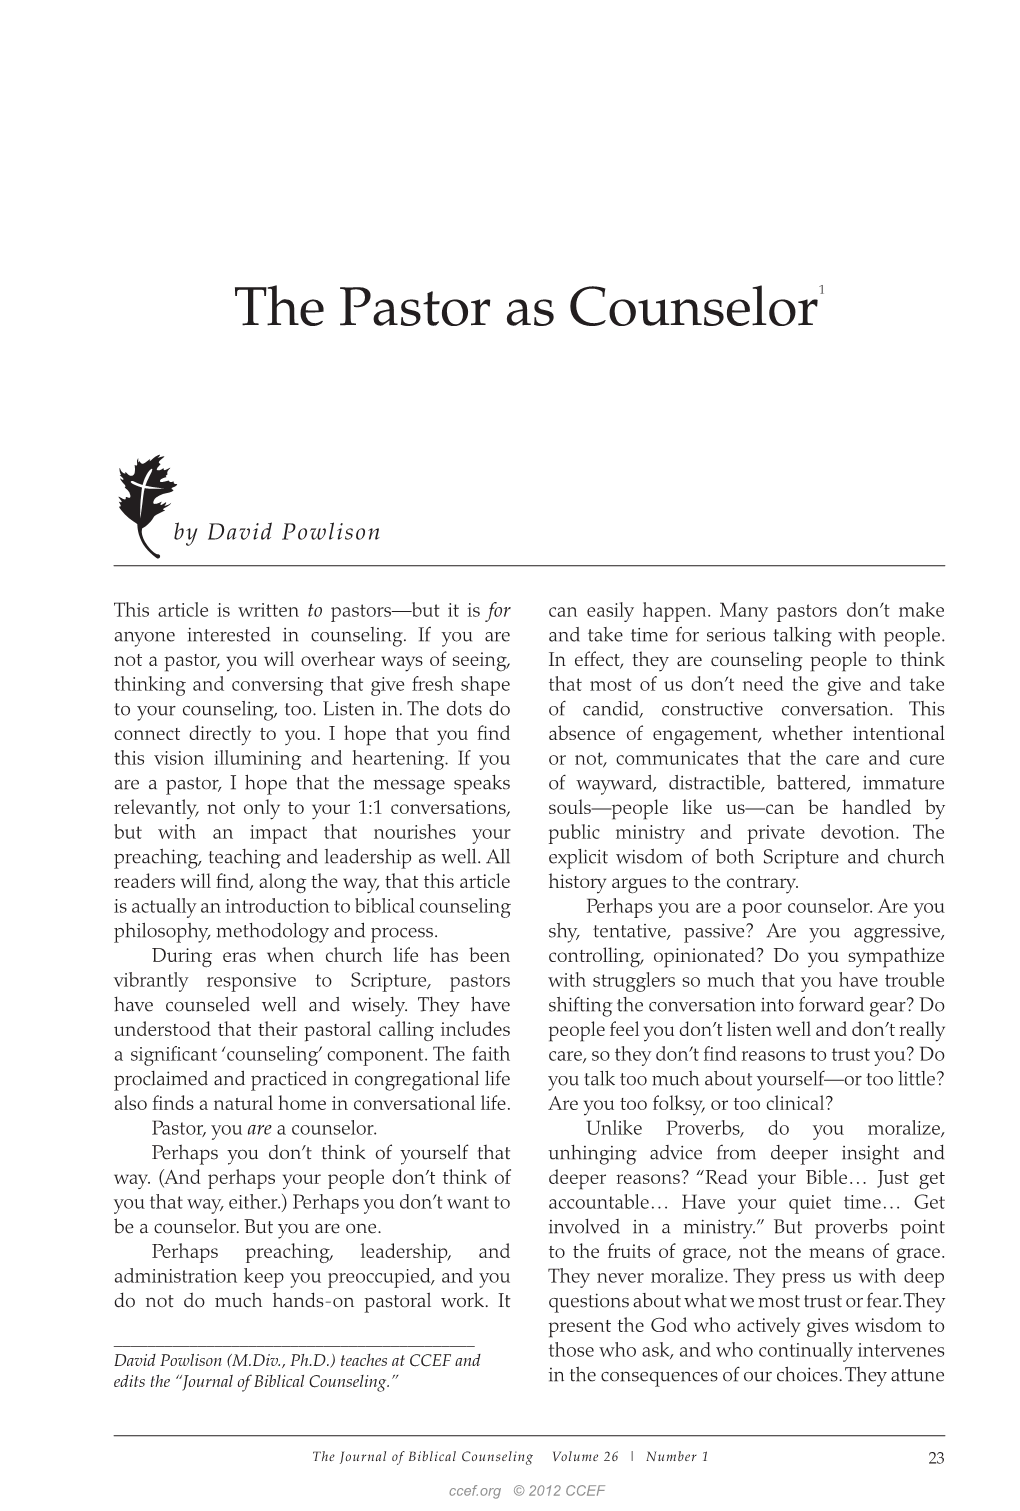 The Pastor As Counselor1